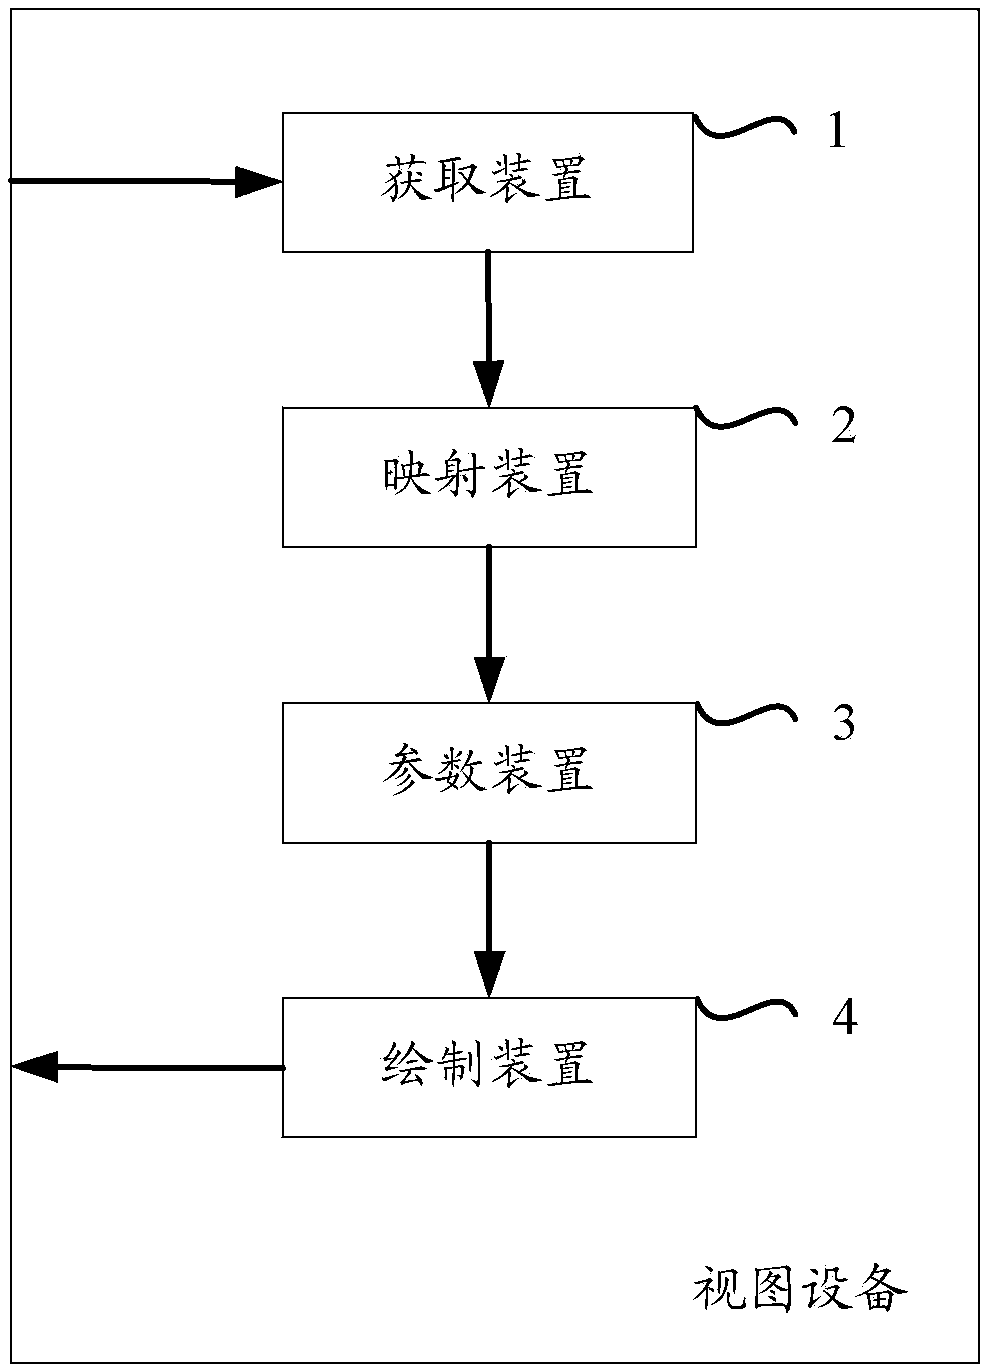 Method and device for generating visualized view